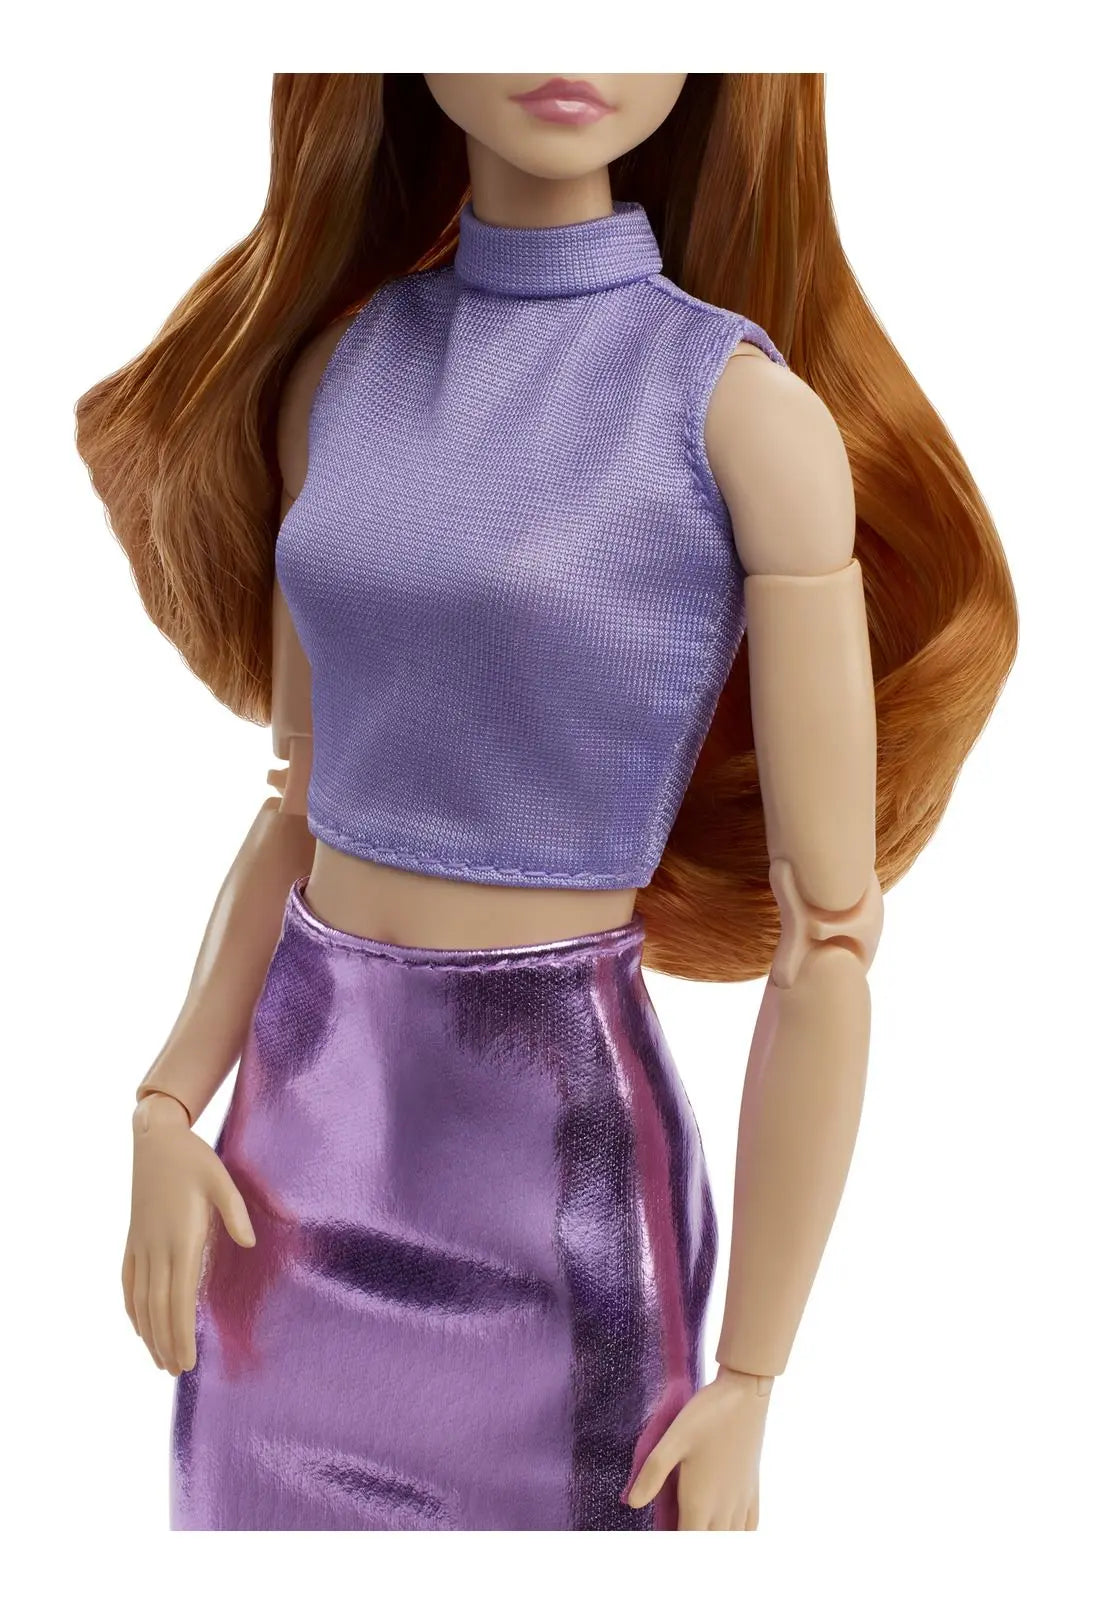 Barbie Looks Doll - Red Hair with Purple Outfit Barbie